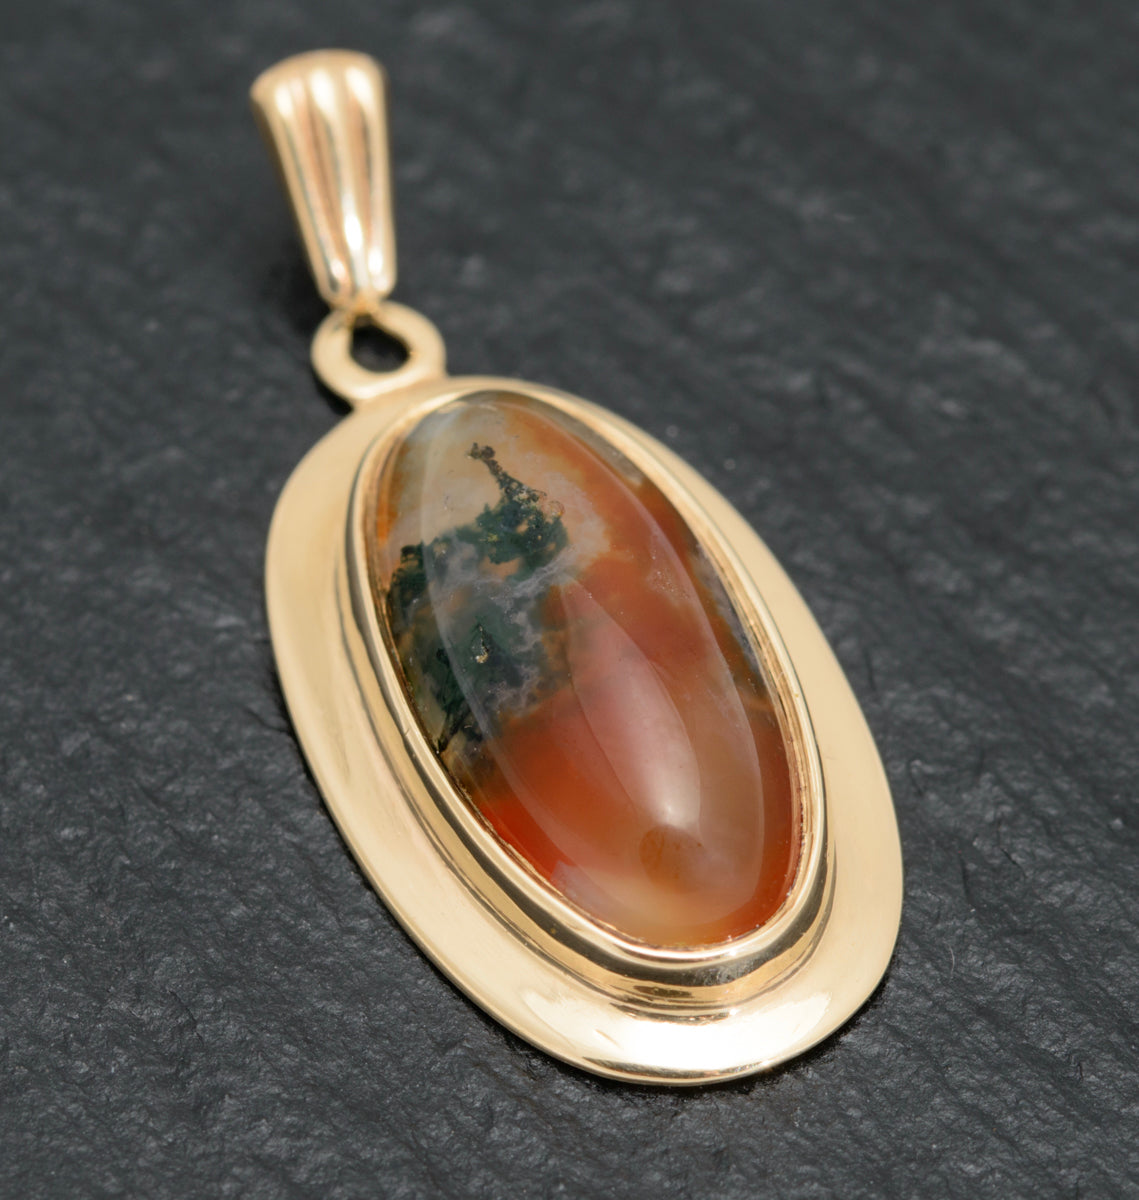 Vintage 9ct Gold Pendant With Moss Agate Polished Cabochon Hallmarked 1971 (A1634)